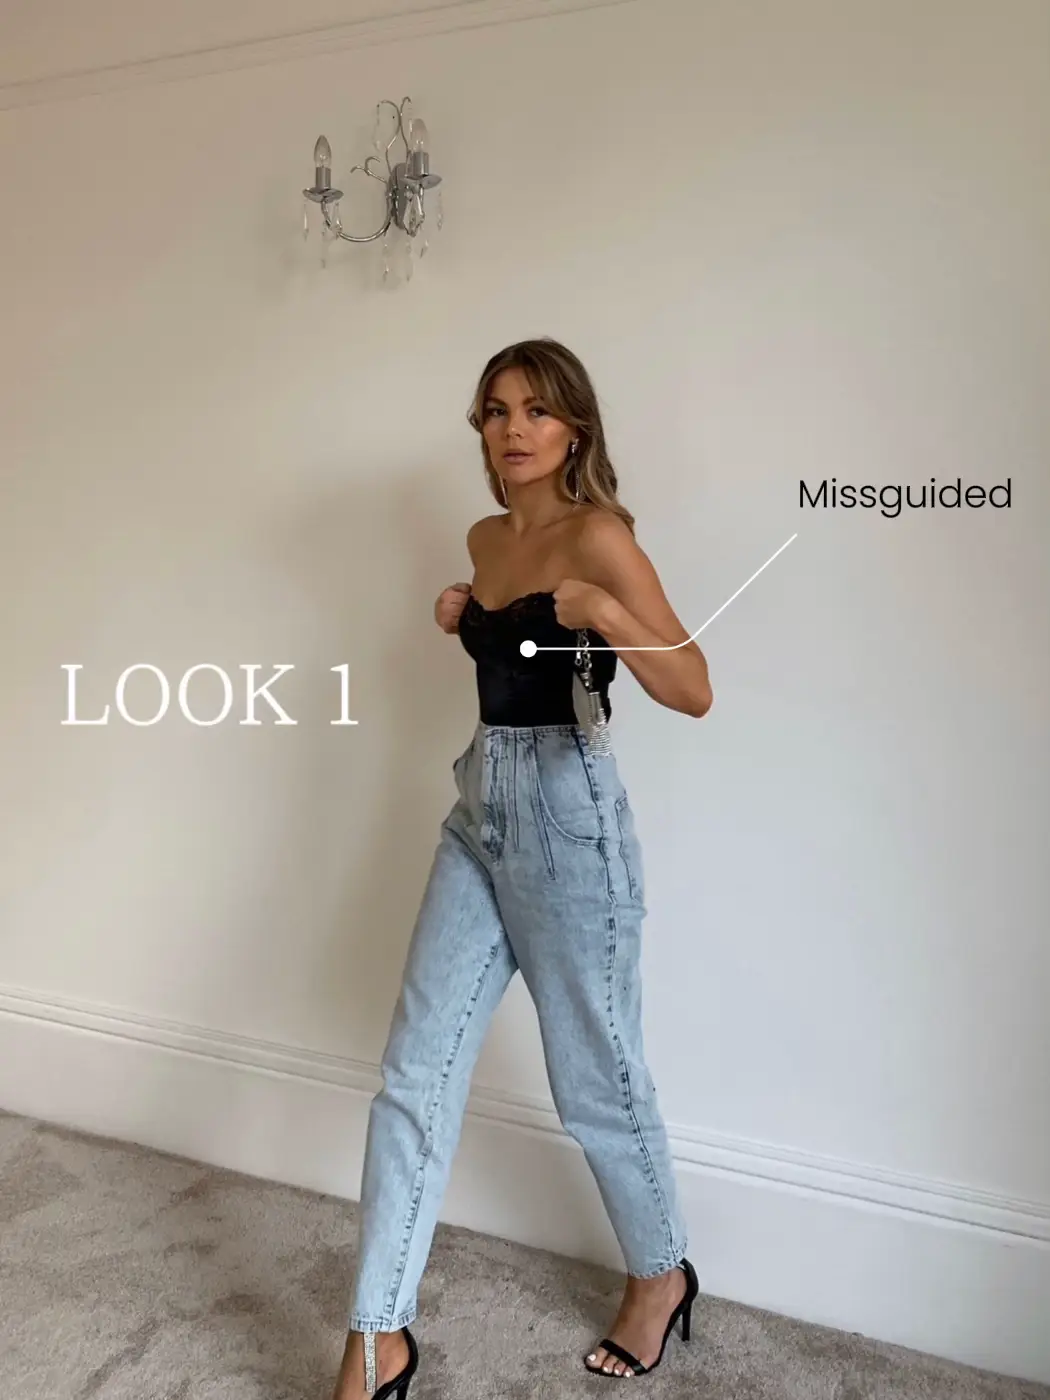 Sweetheart Necklines Instantly Elevate Basic Jeans-And-A-Cute-Top